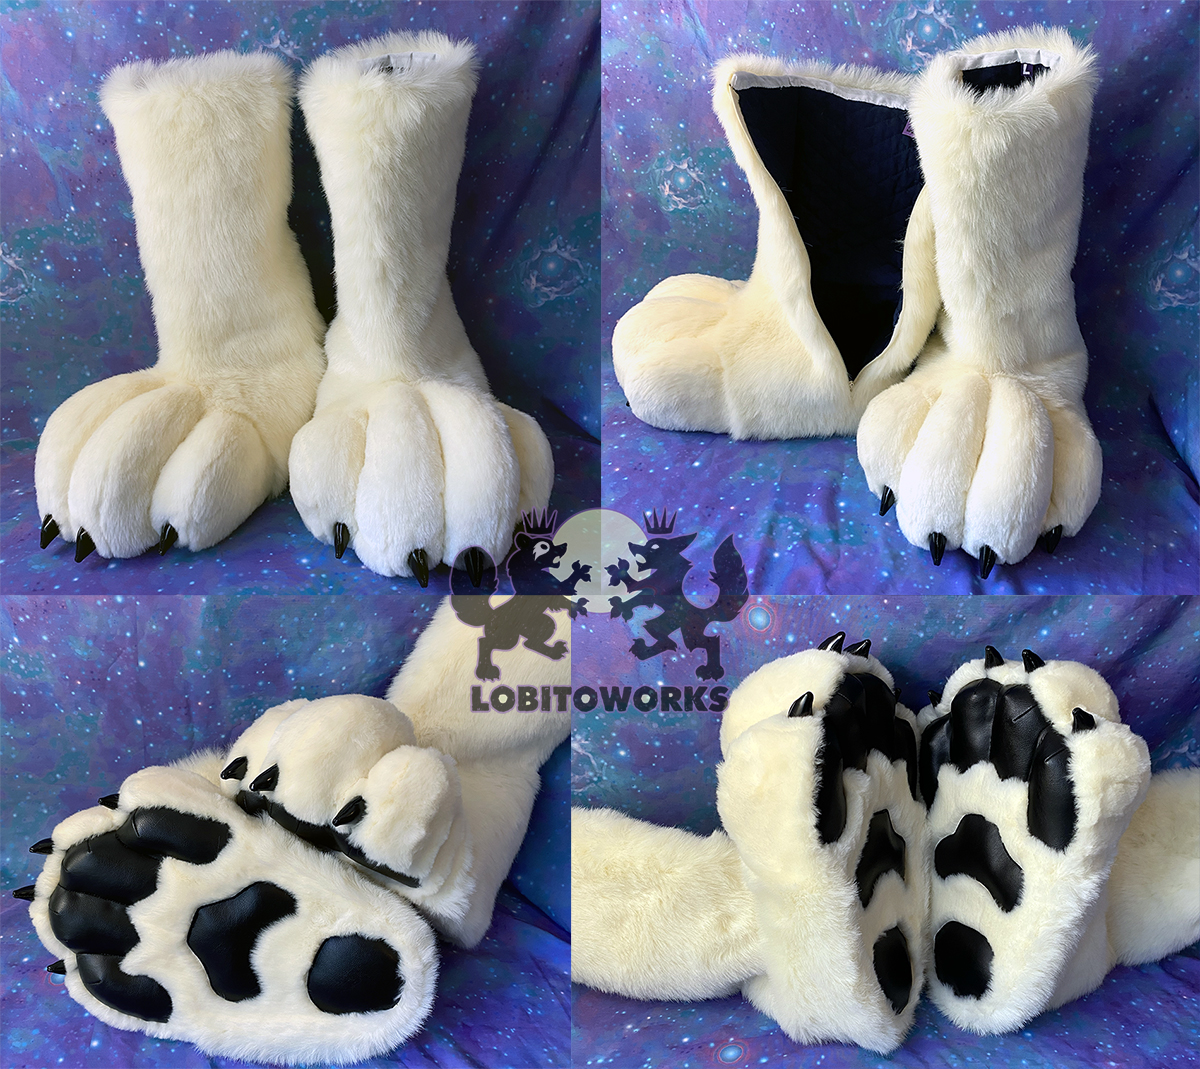 A returning client commissioned some stylish sneakers to go over his feetpaws from us! Client supplied the Converse patches- otherwise we don't work with logos from other brands. These came out great and will protect the detailed foot bottoms of his paws! #fursuit